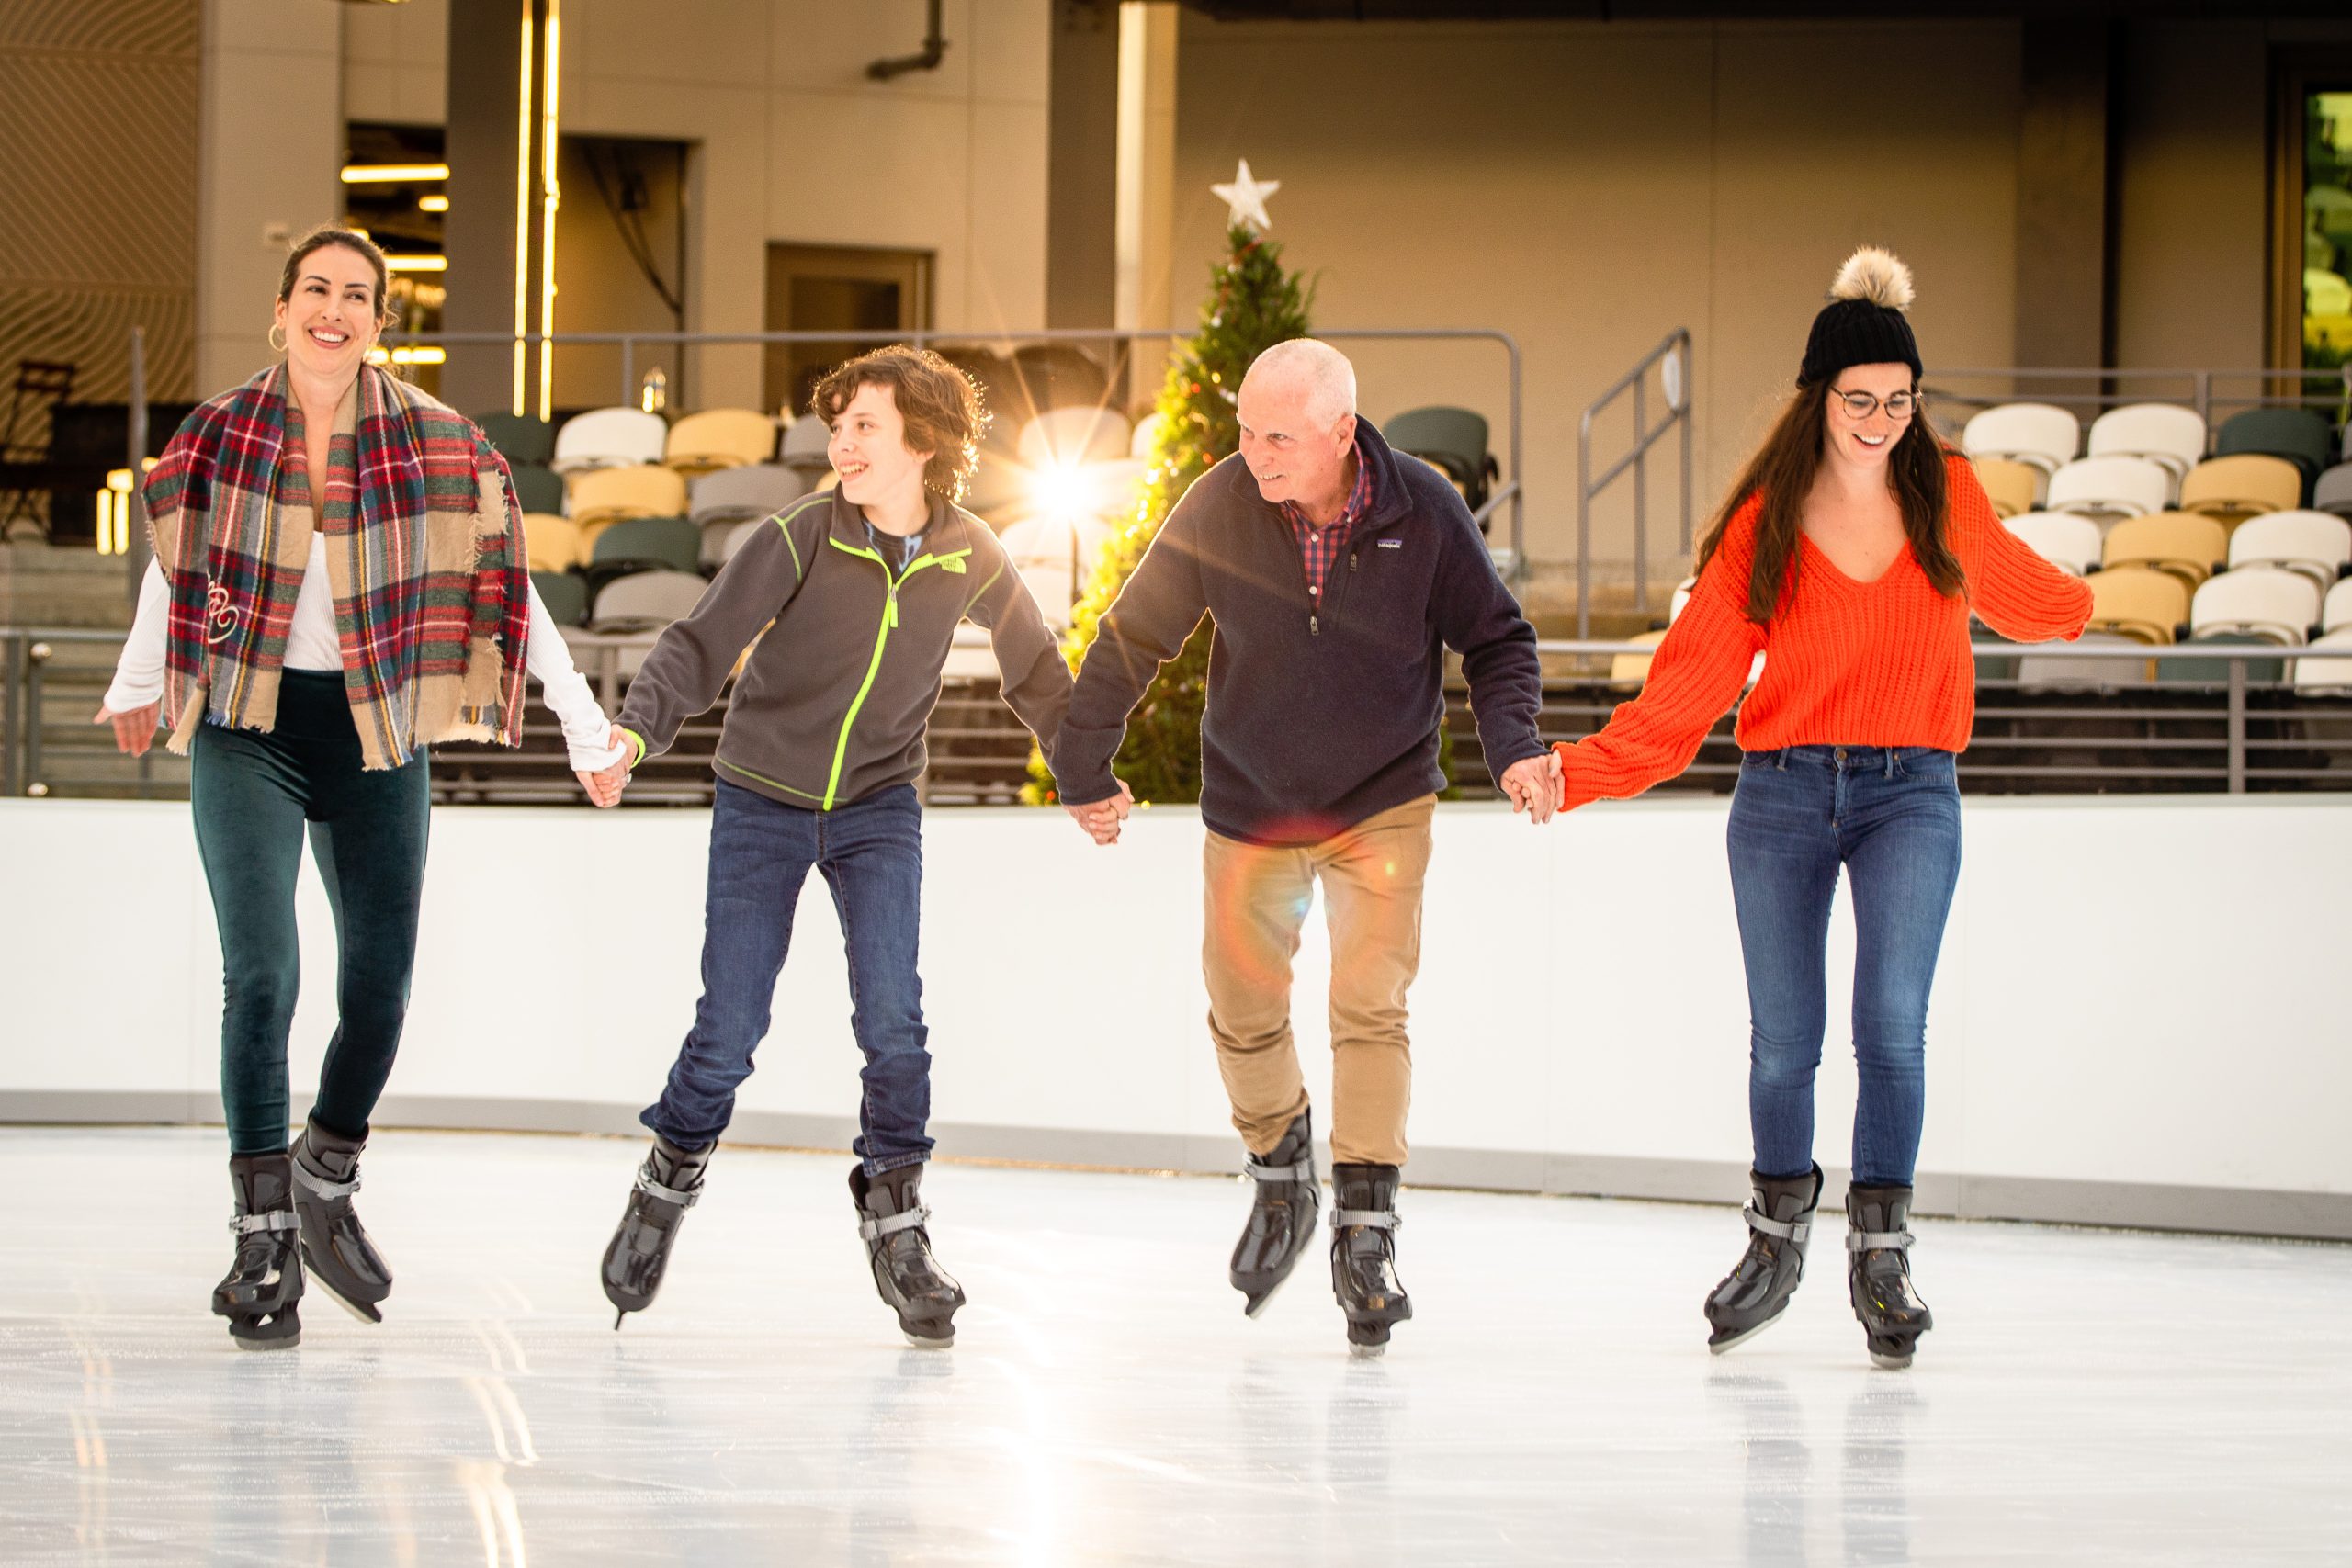 family ice skating together